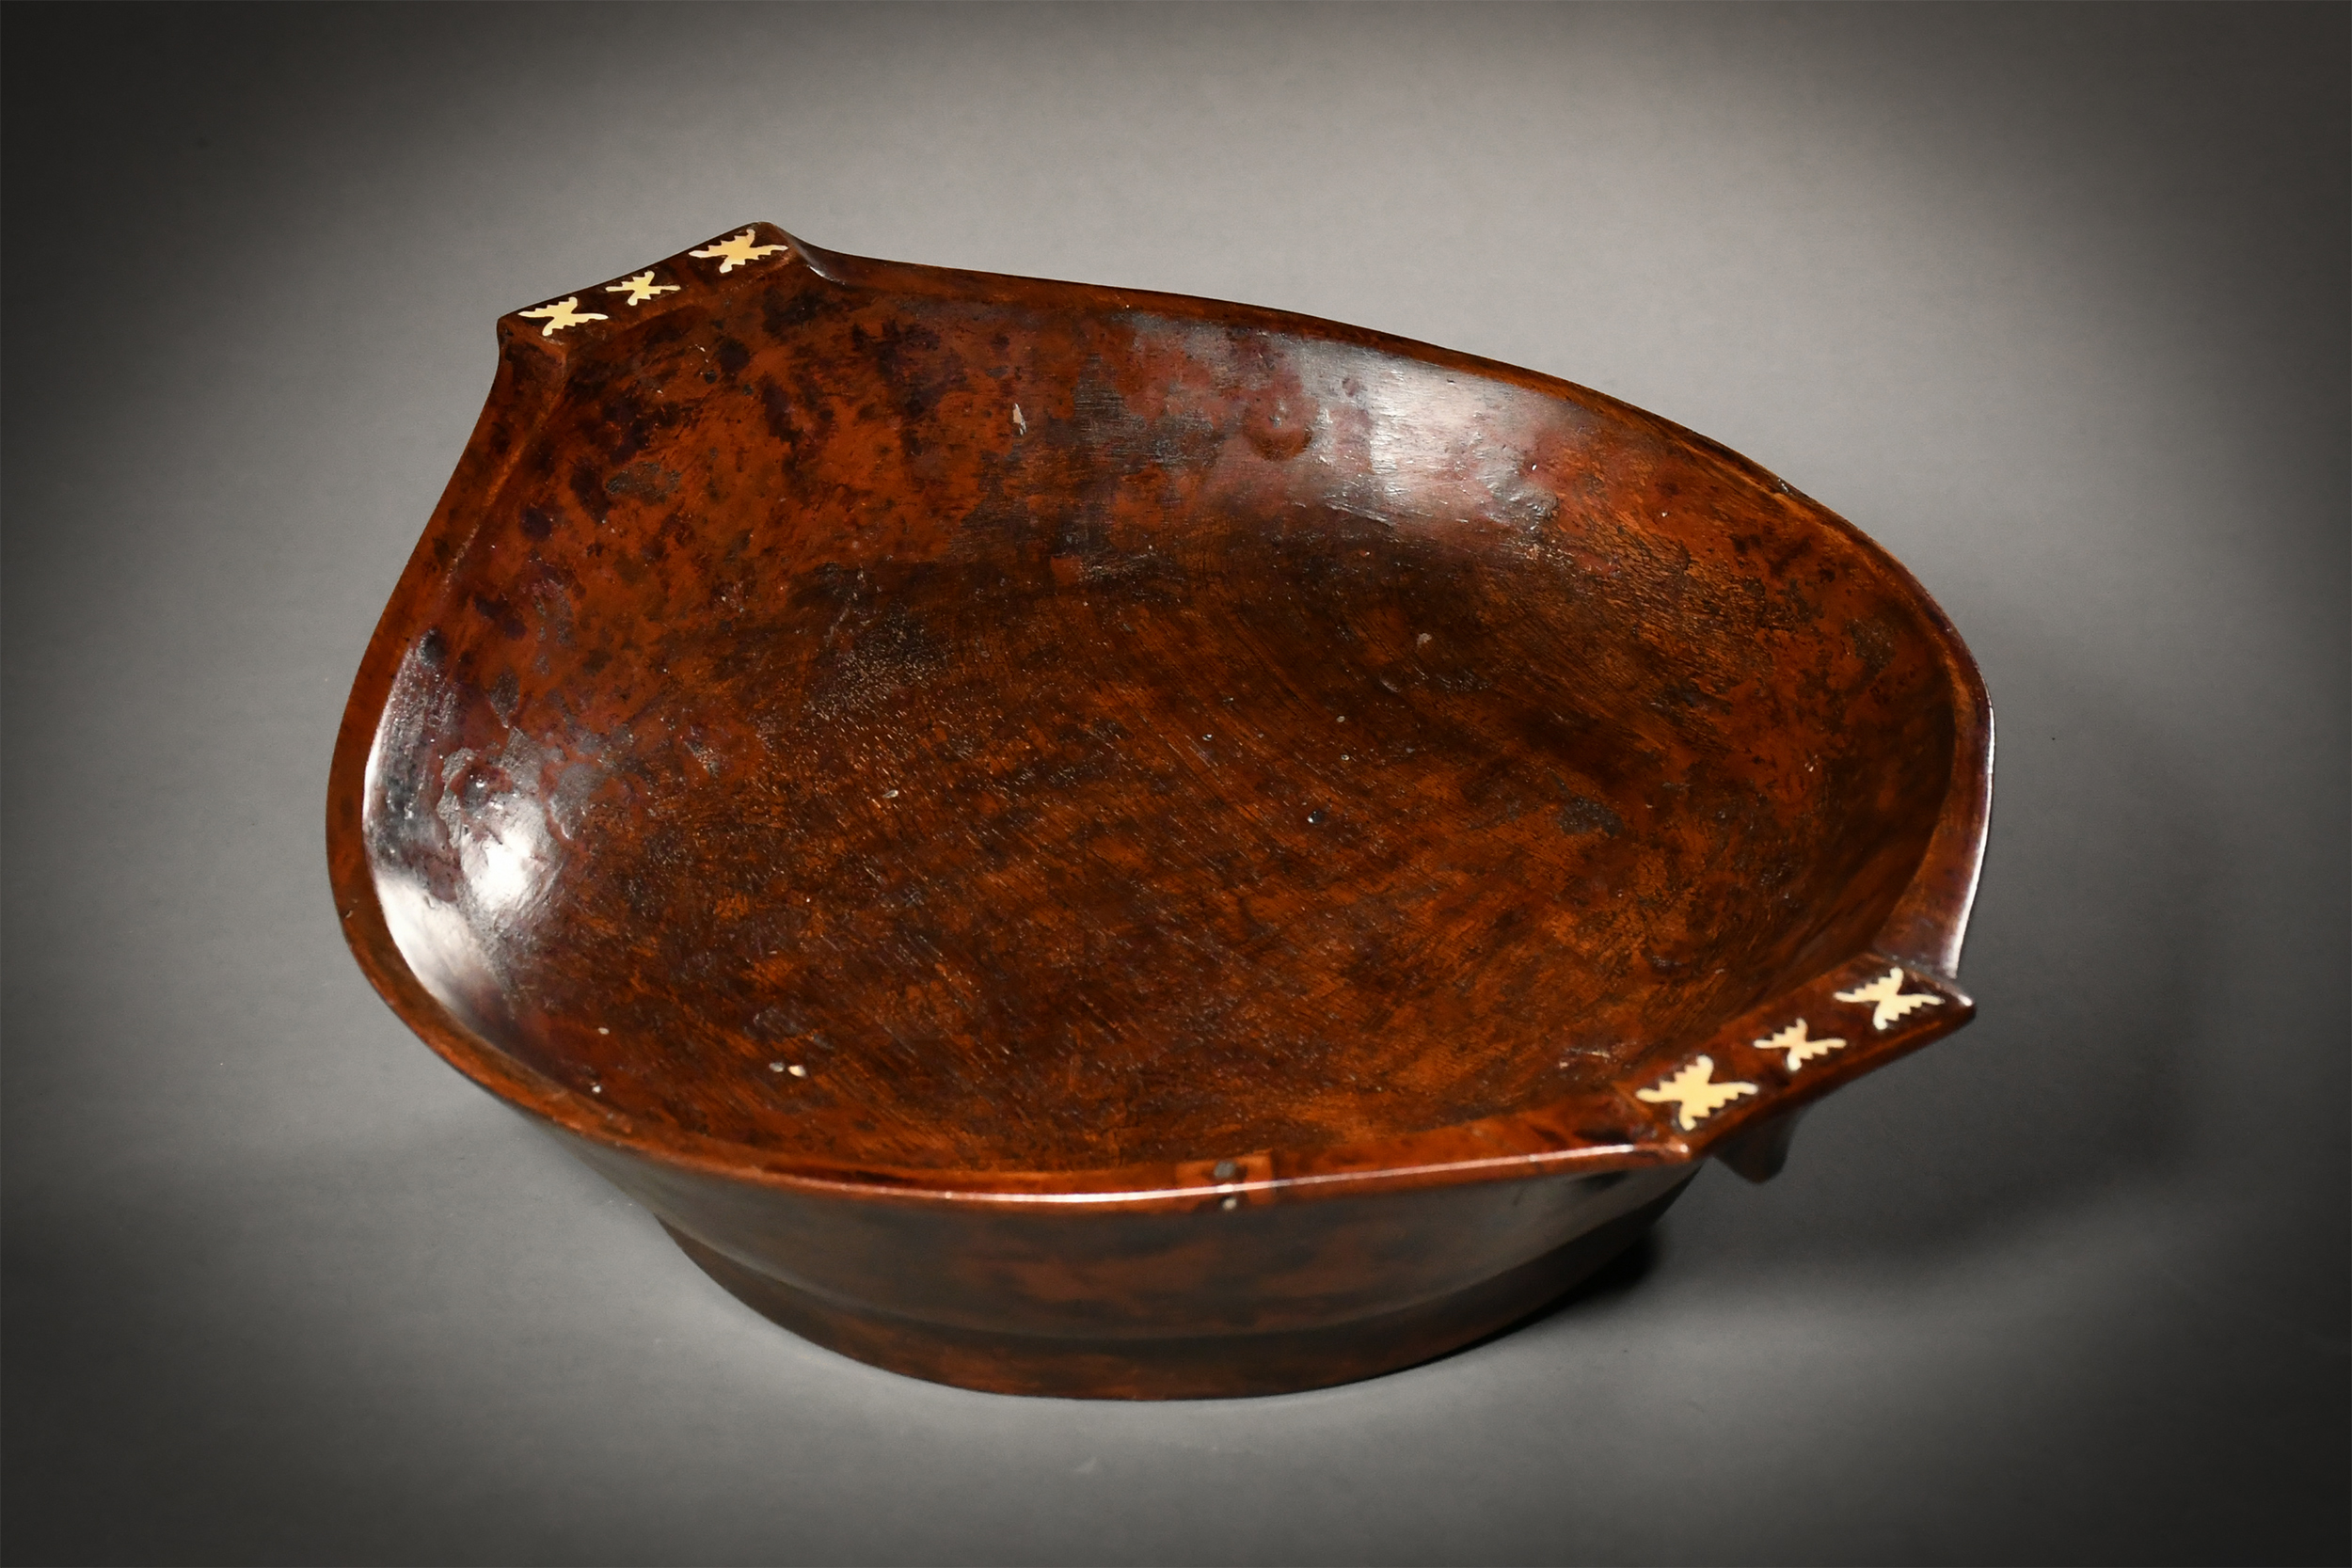 A fine old Ceremonial Food Bowl from Chukk Island Micronesia